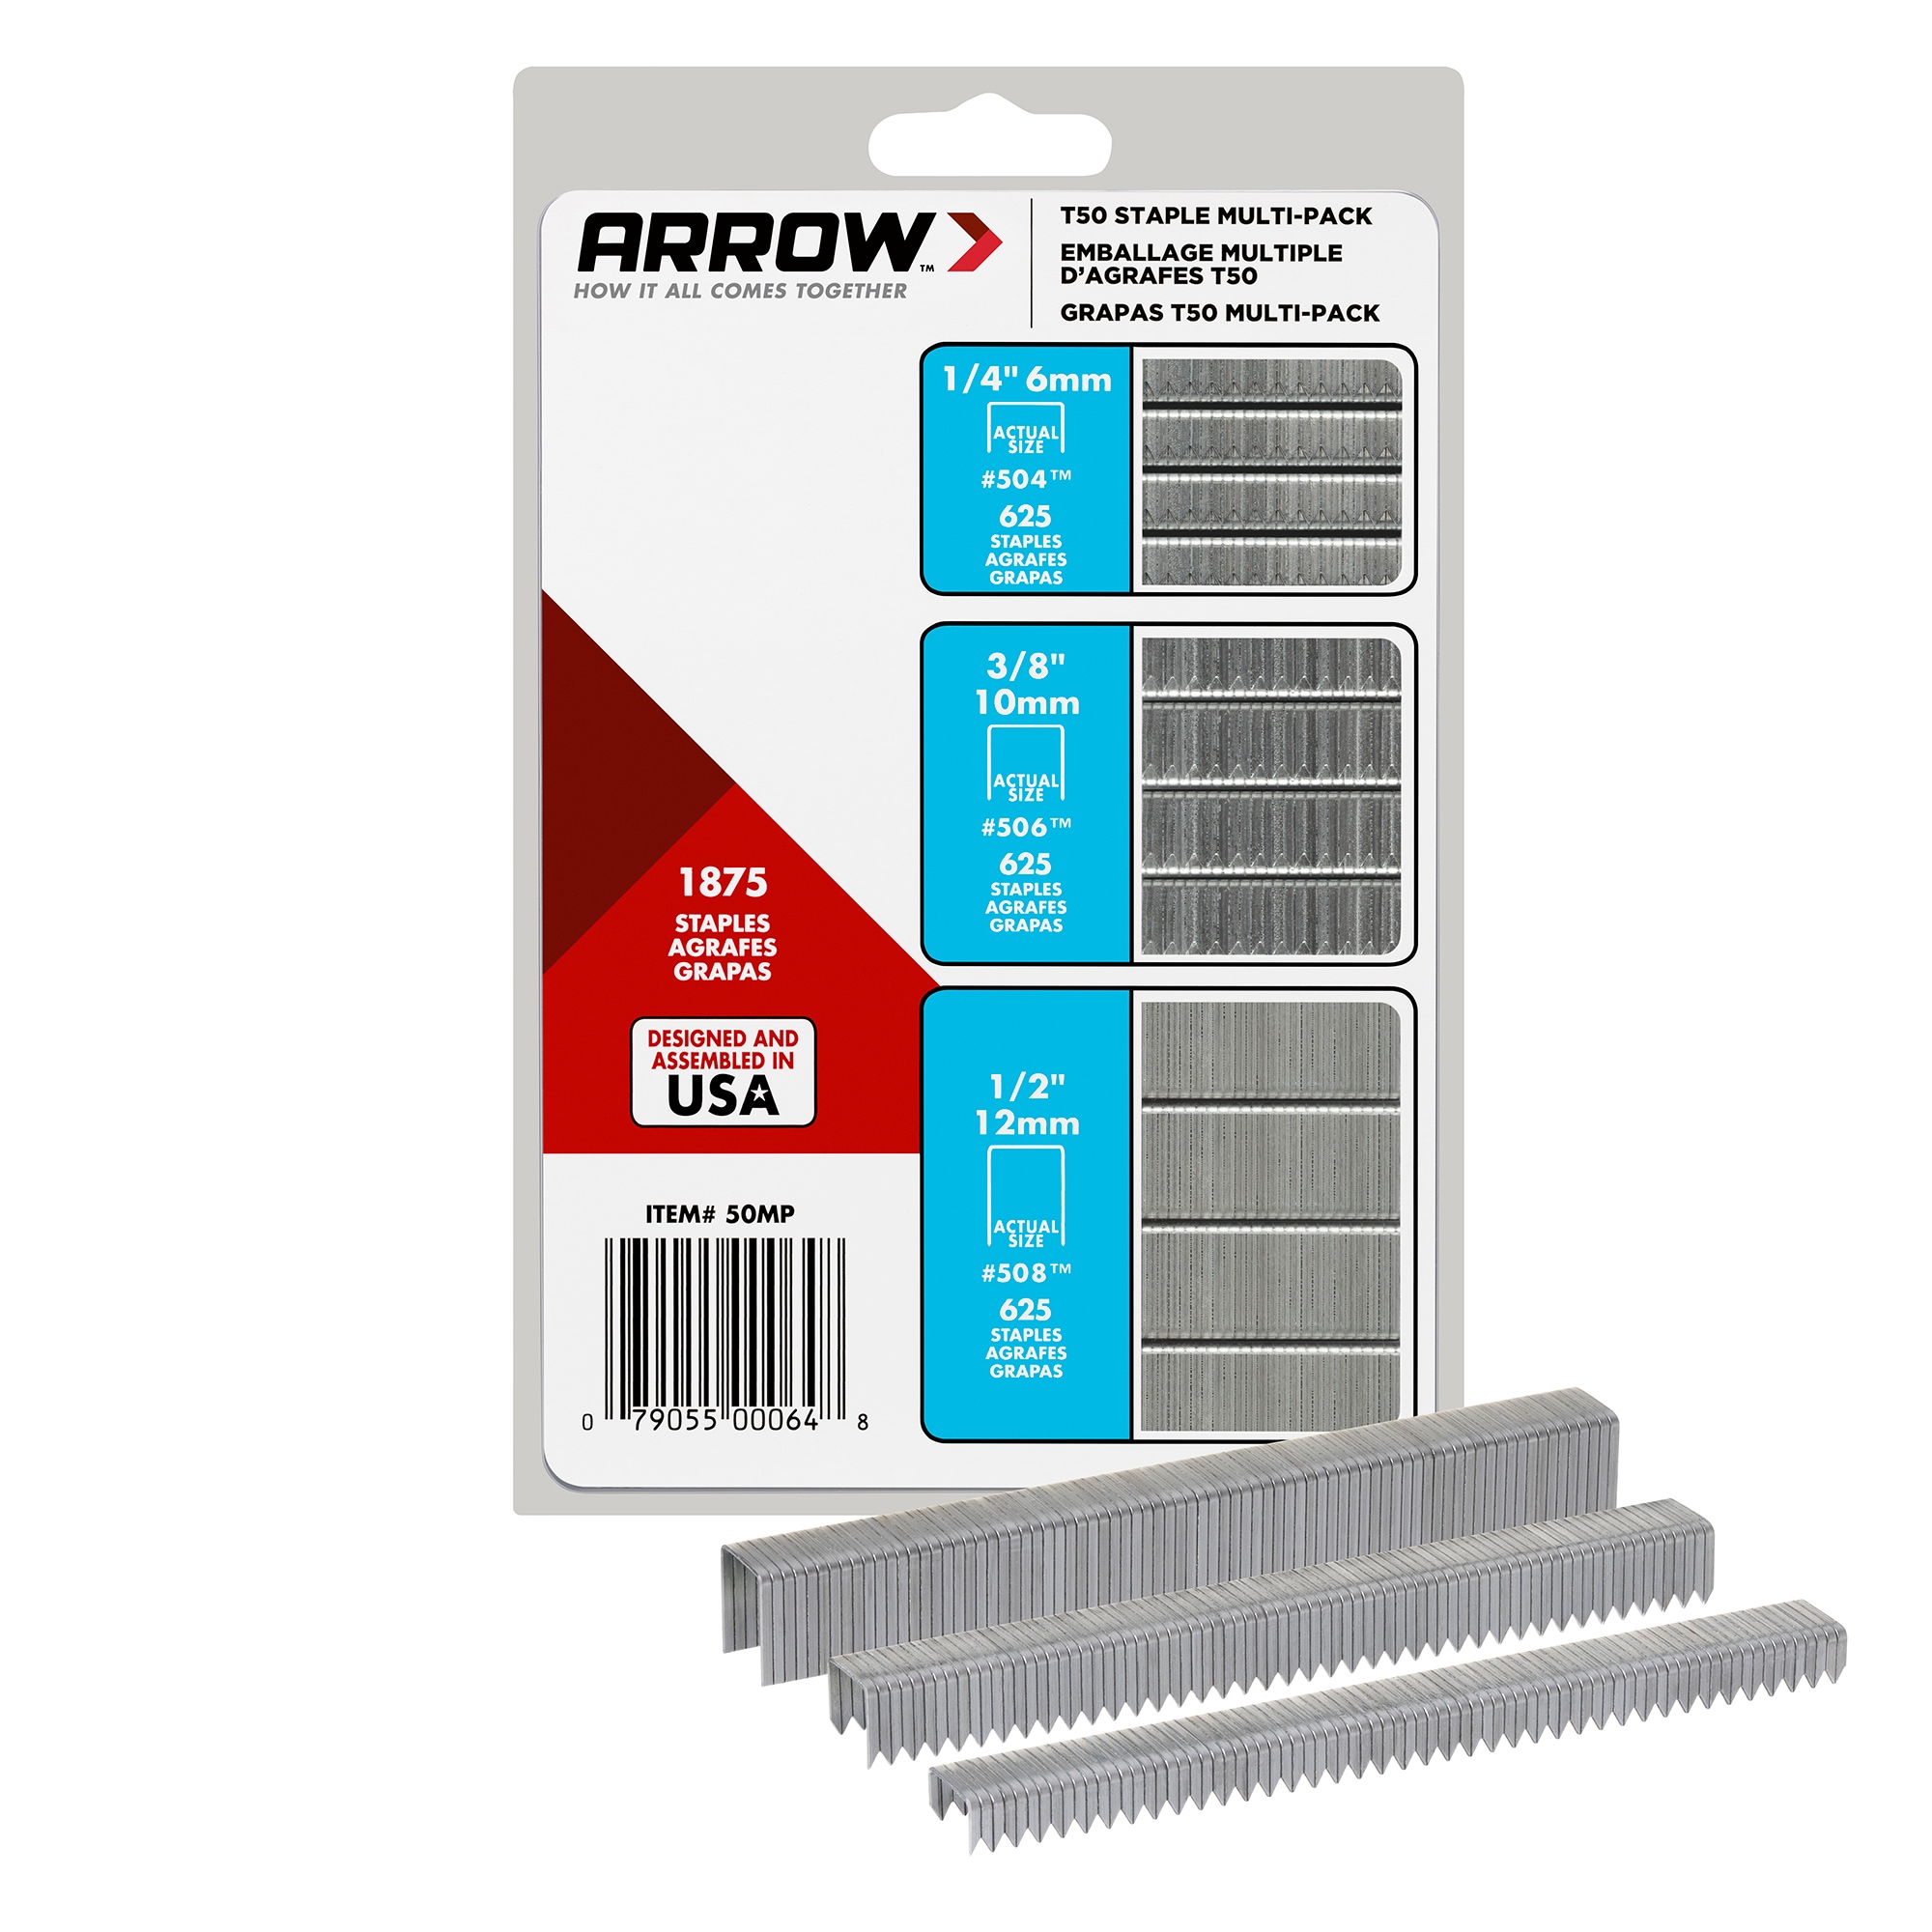 Arrow 1/2 inch T50 Staples - 1,250 Count Galvanized Steel Chisel Point  Staples